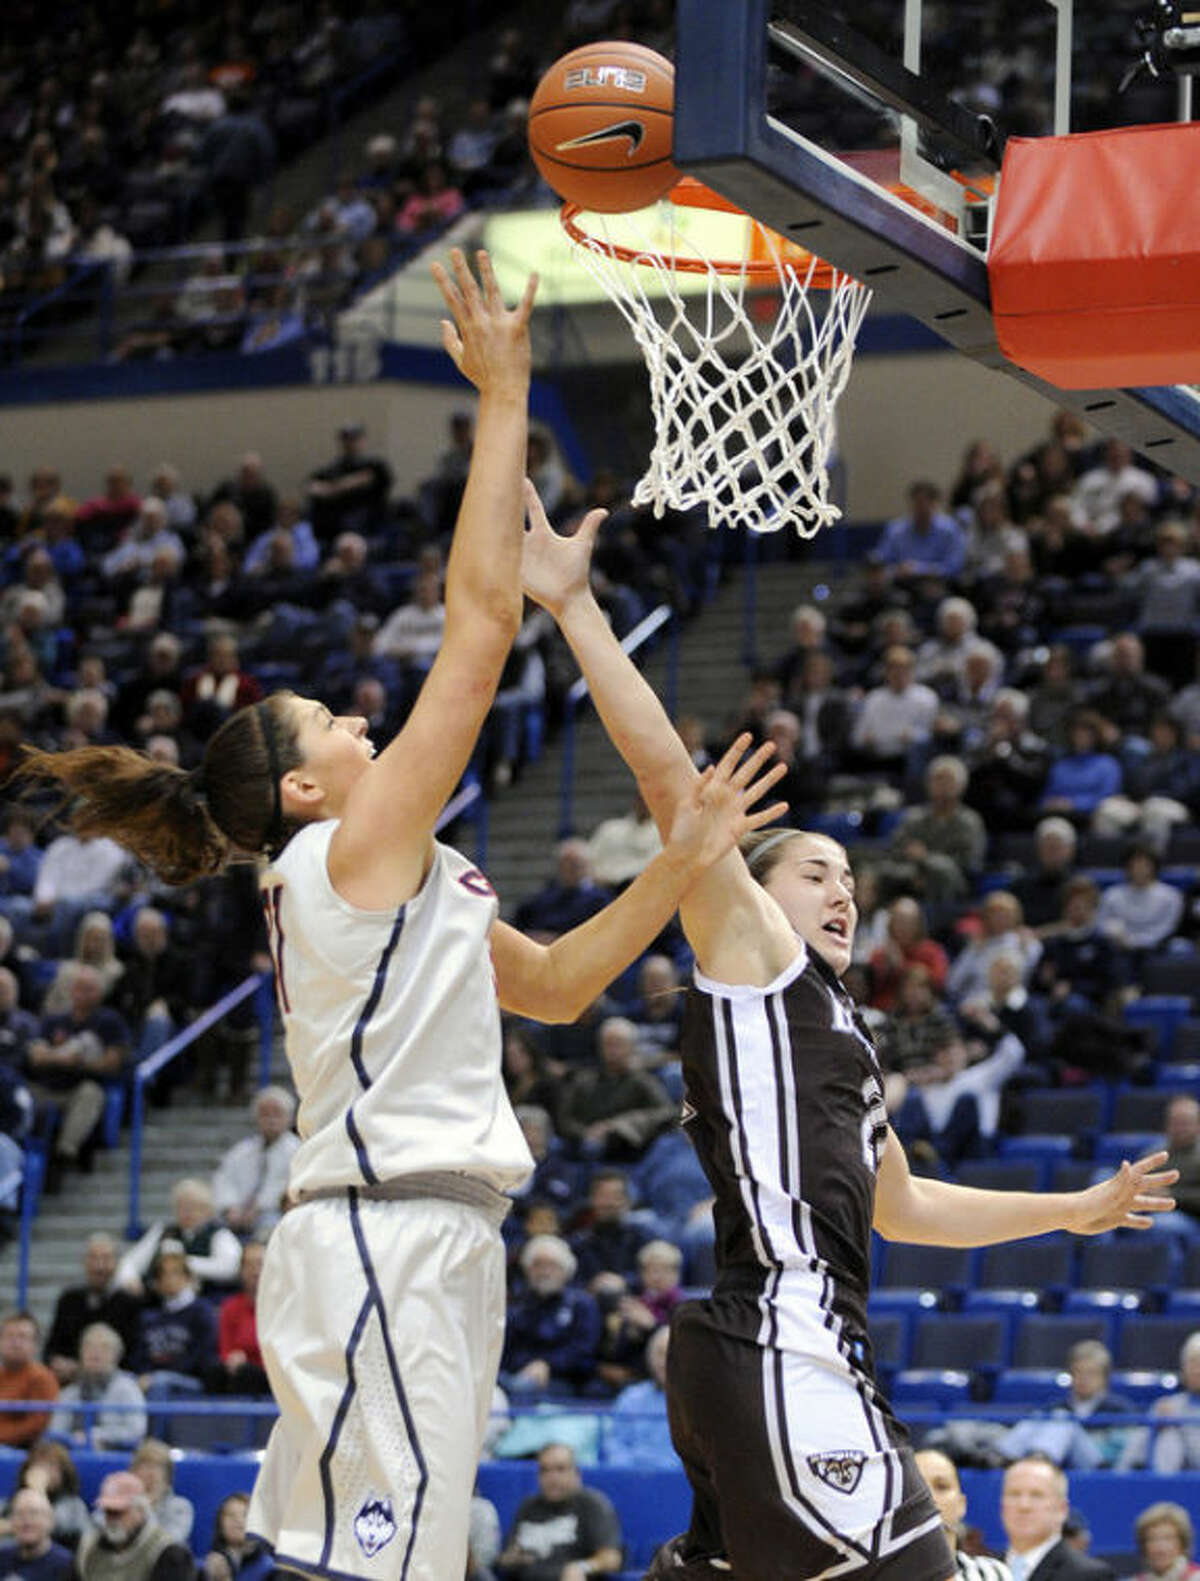 Connecticut's Stefanie Dolson, left, shoots over St. Bonaventure's Nyla Rueter during the first half of an NCAA college basketball game in Hartford, Conn., on Sunday, Nov. 24, 2013. (AP Photo/Fred Beckham)